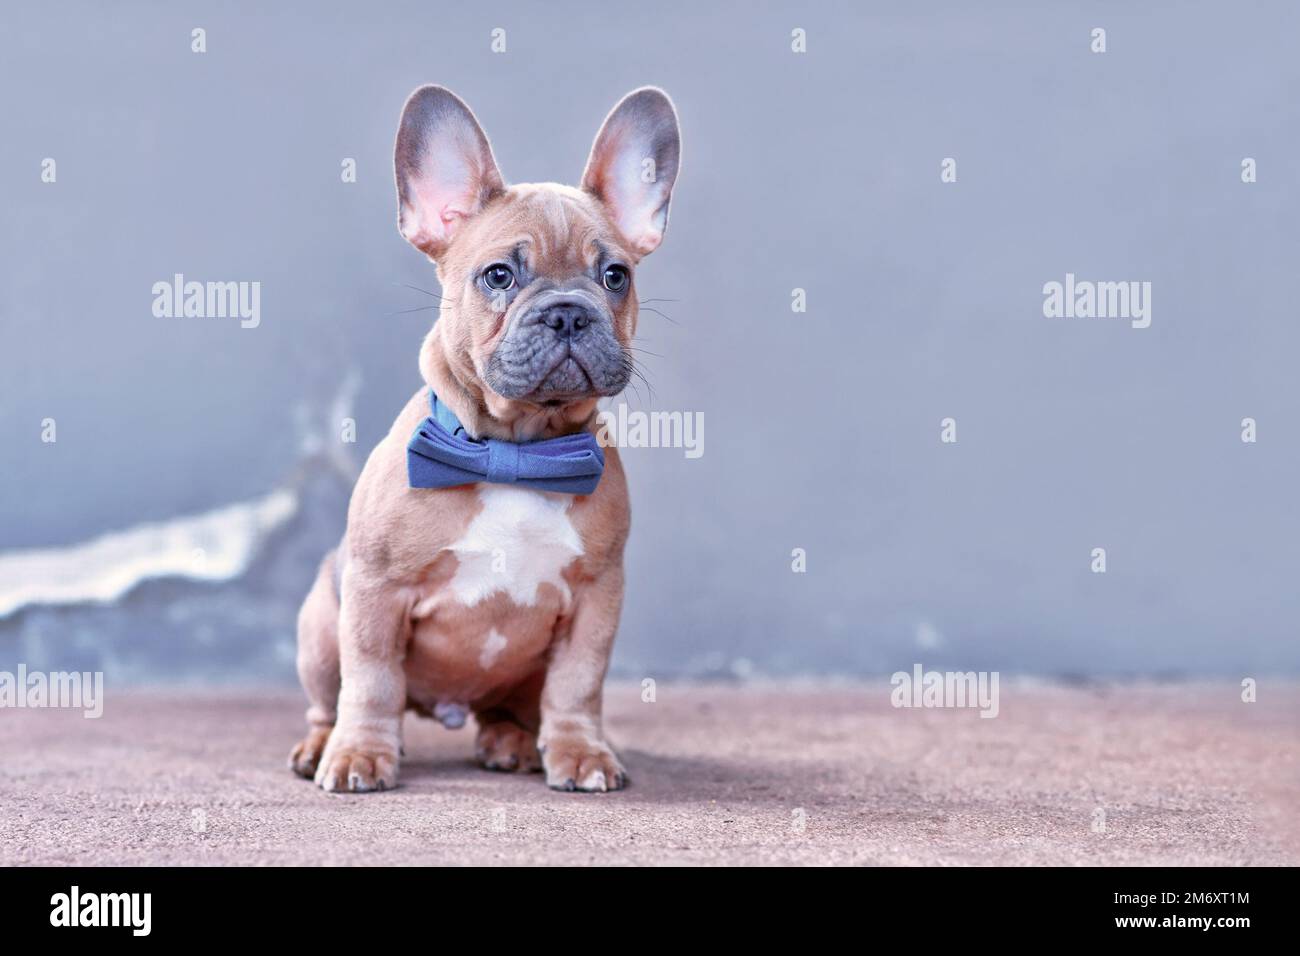 Blue red fawn French Bulldog dog puppy with blue bow tie in front of gray wall Stock Photo